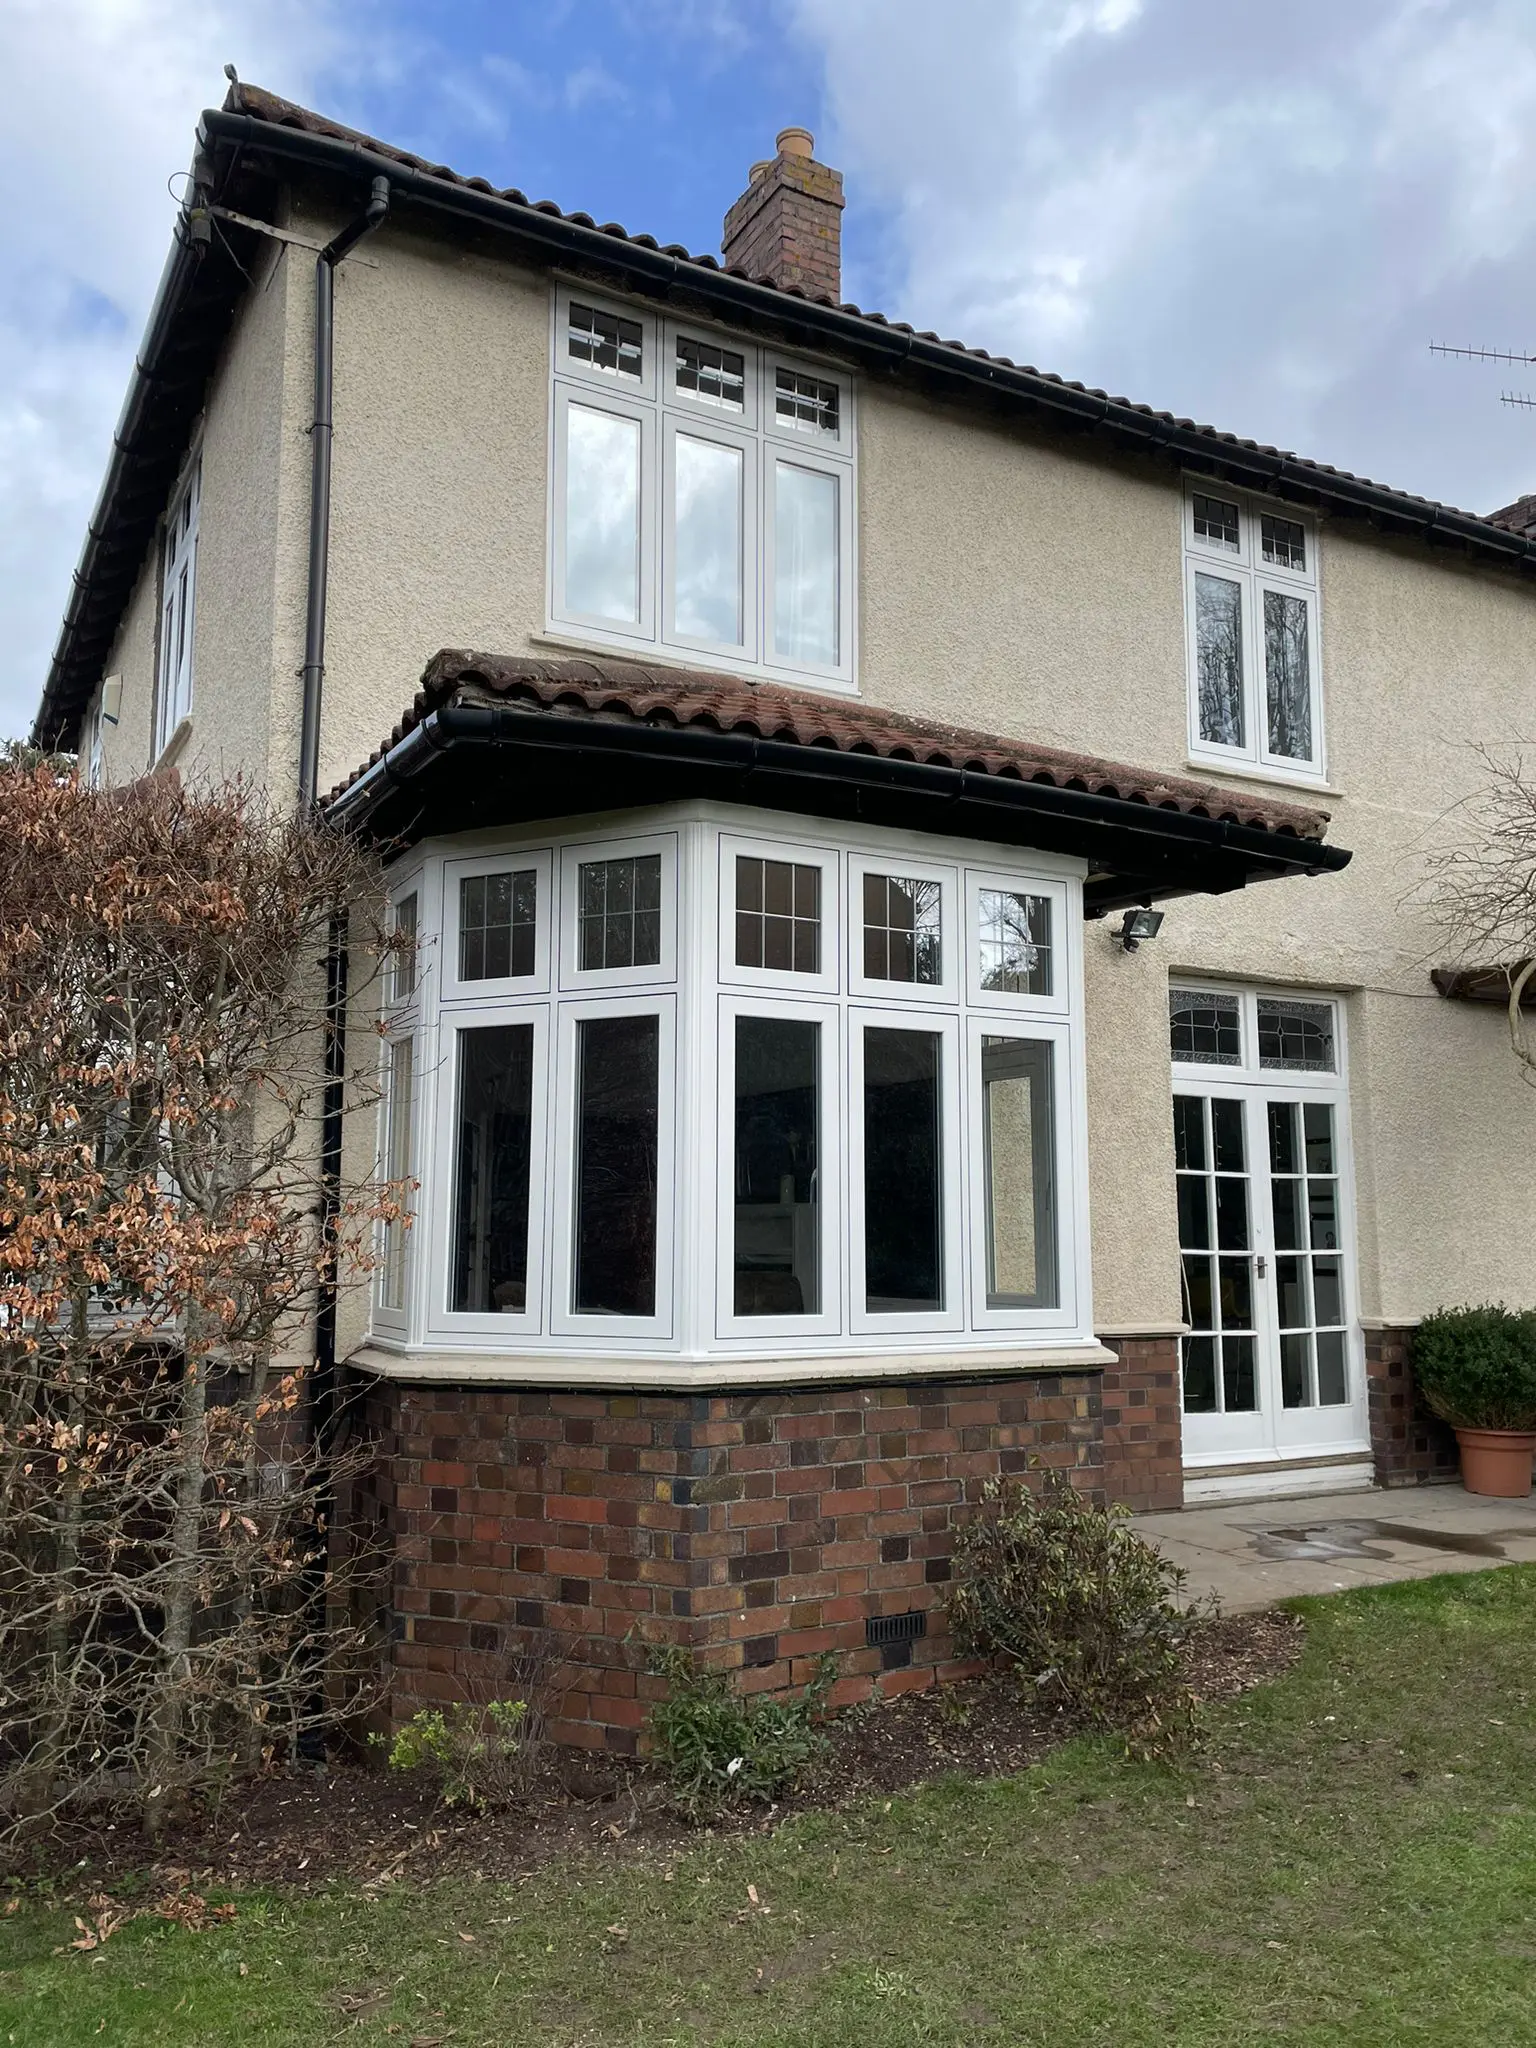 Double glazed doors and windows in a Bristol home